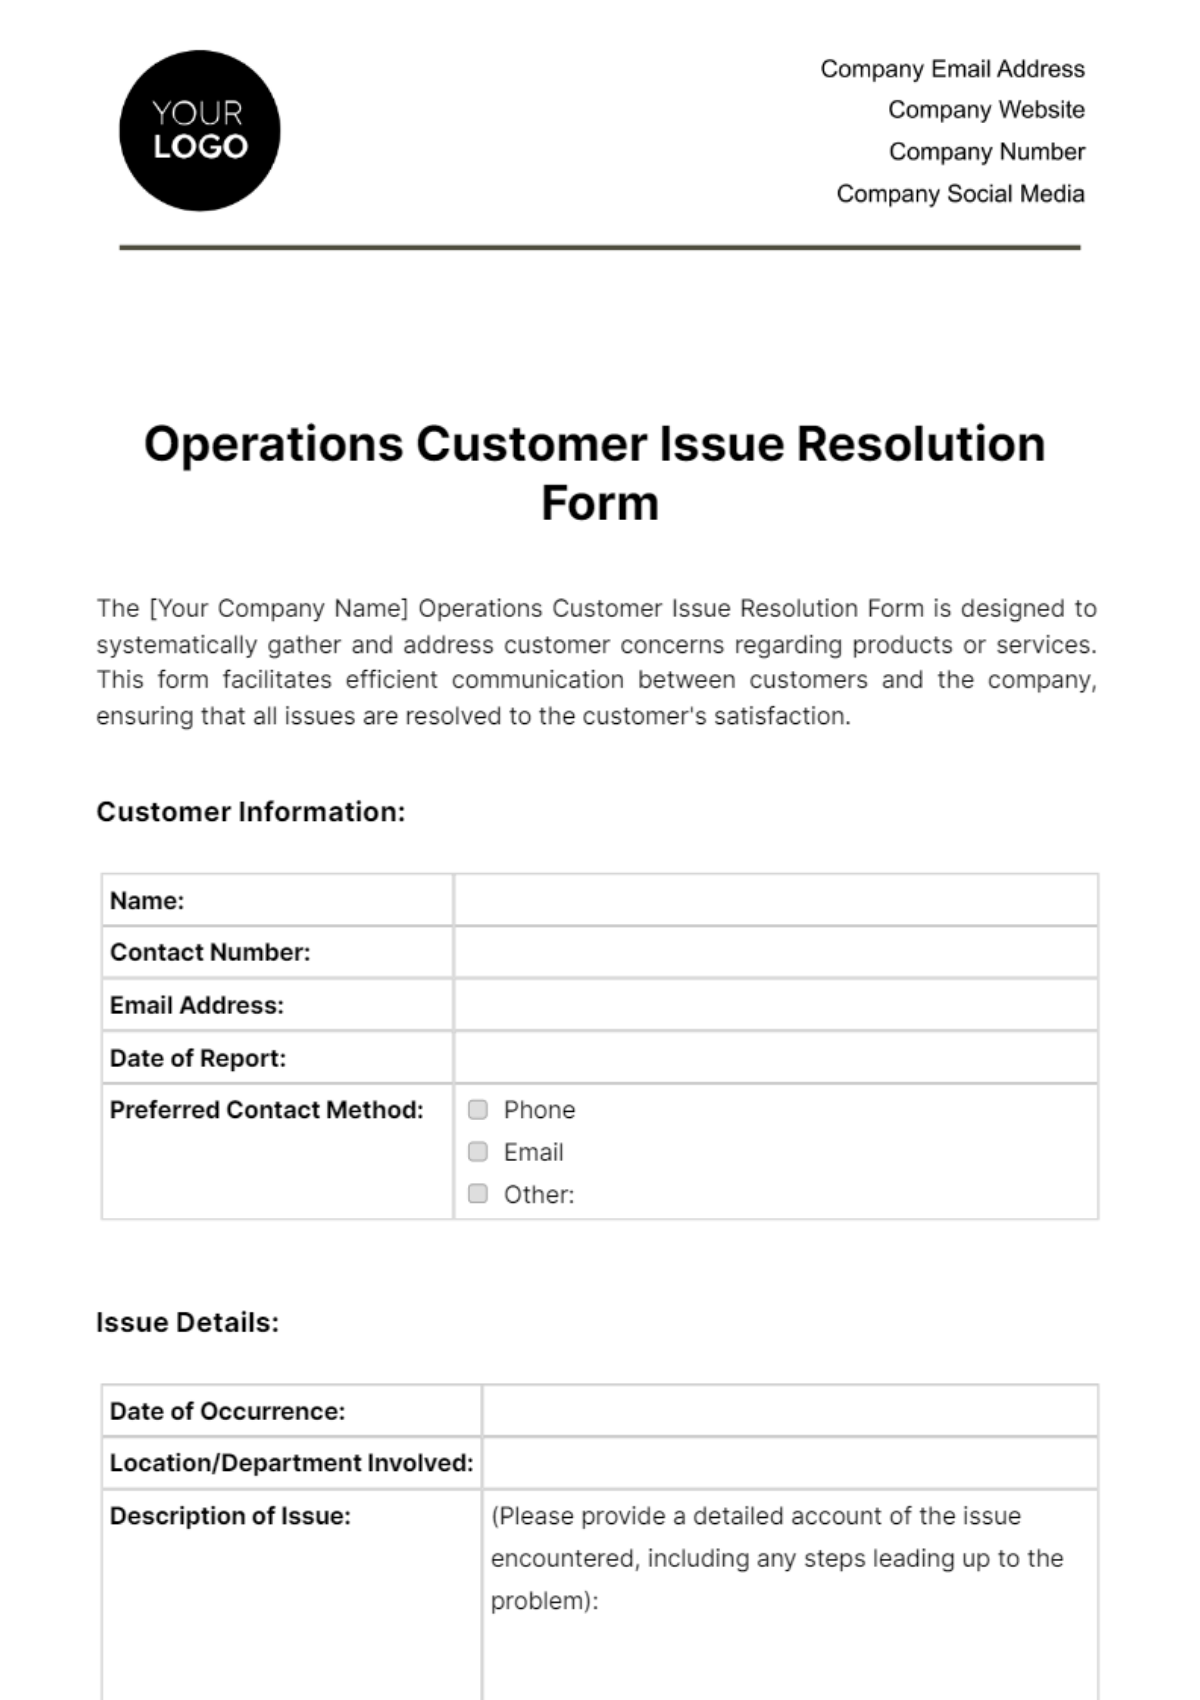 Operations Customer Issue Resolution Form Template